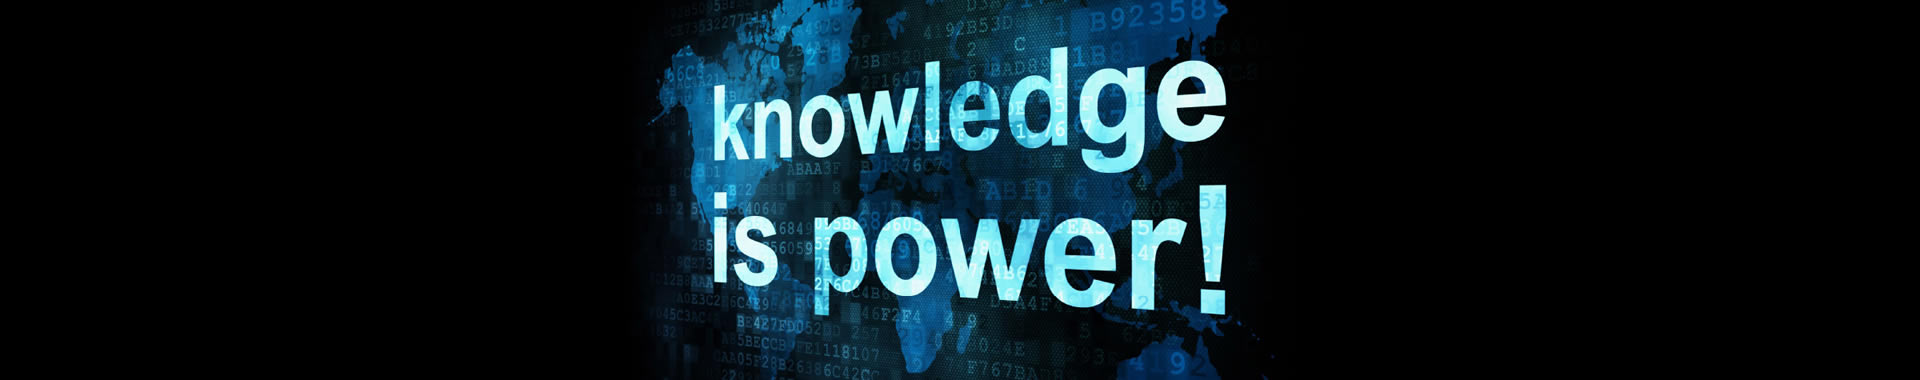 This page of planning calculators contains a banner image with the words "Knowledge is Power."